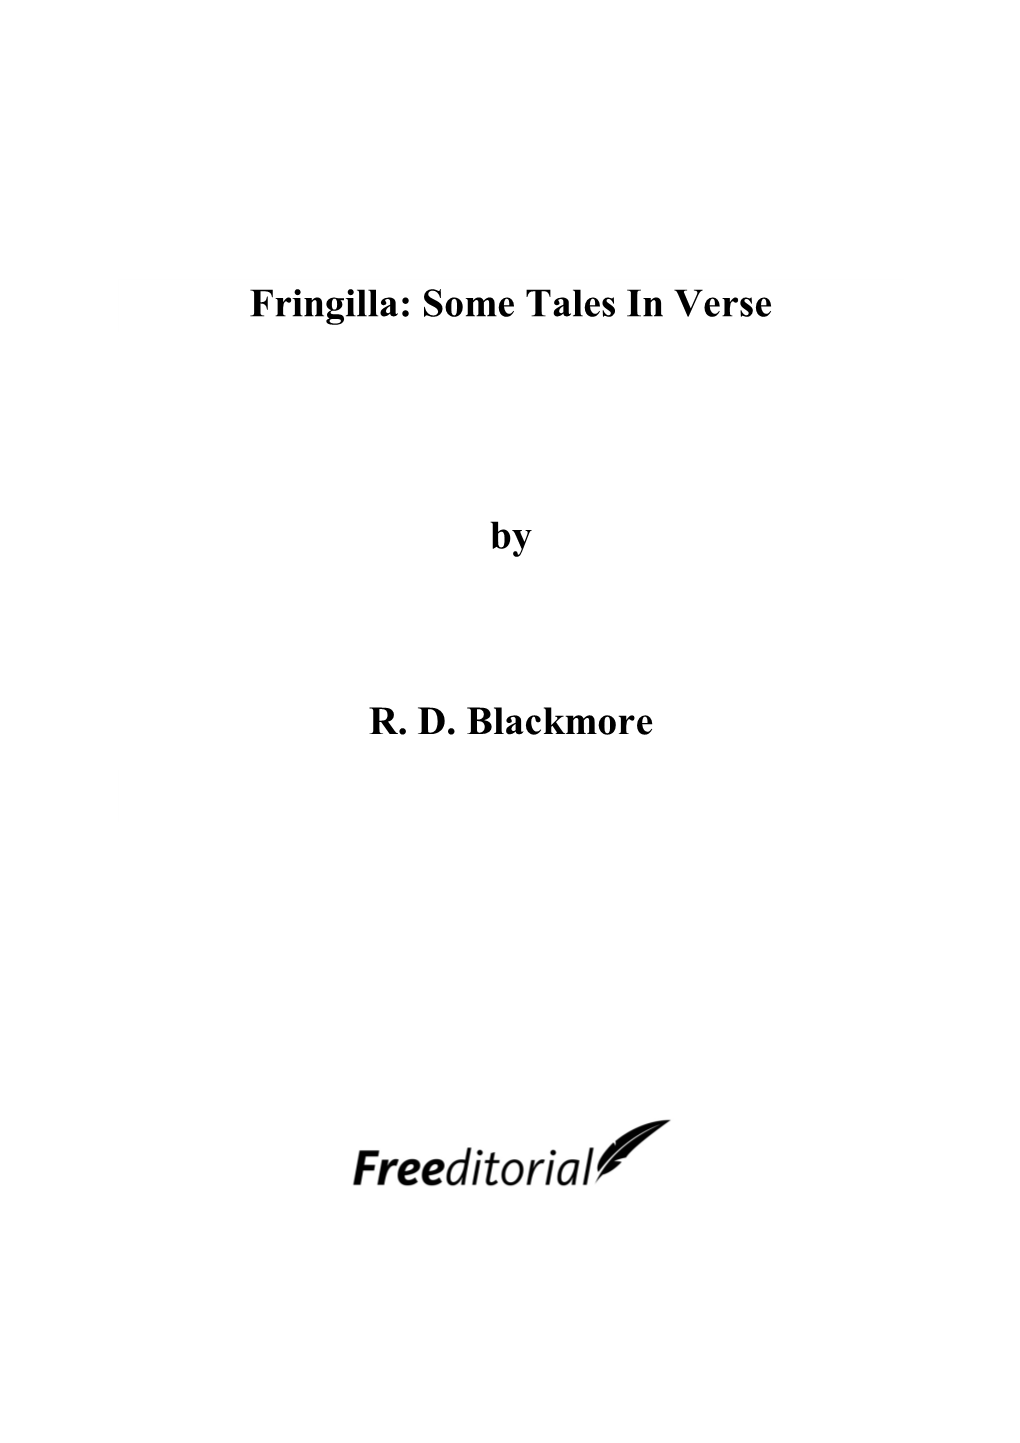 Fringilla: Some Tales in Verse by R. D. Blackmore